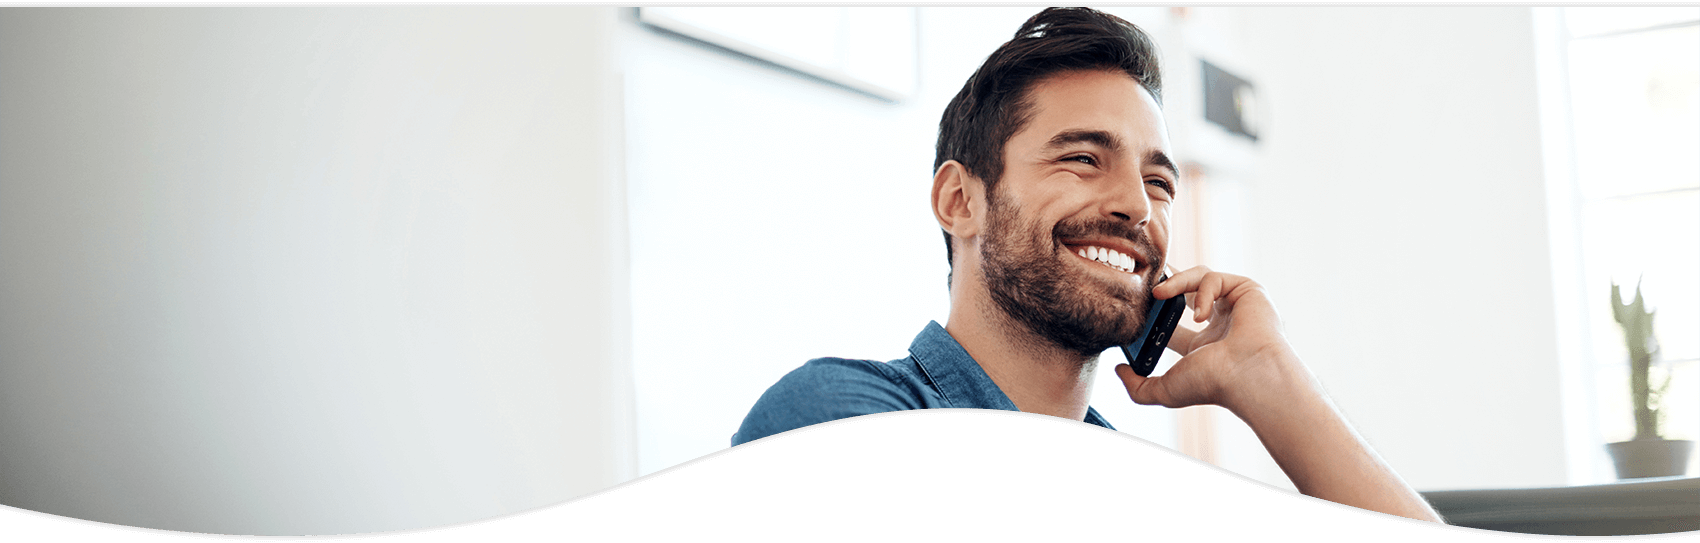 Contact our team in Aurora, CO | First Smiles Dental